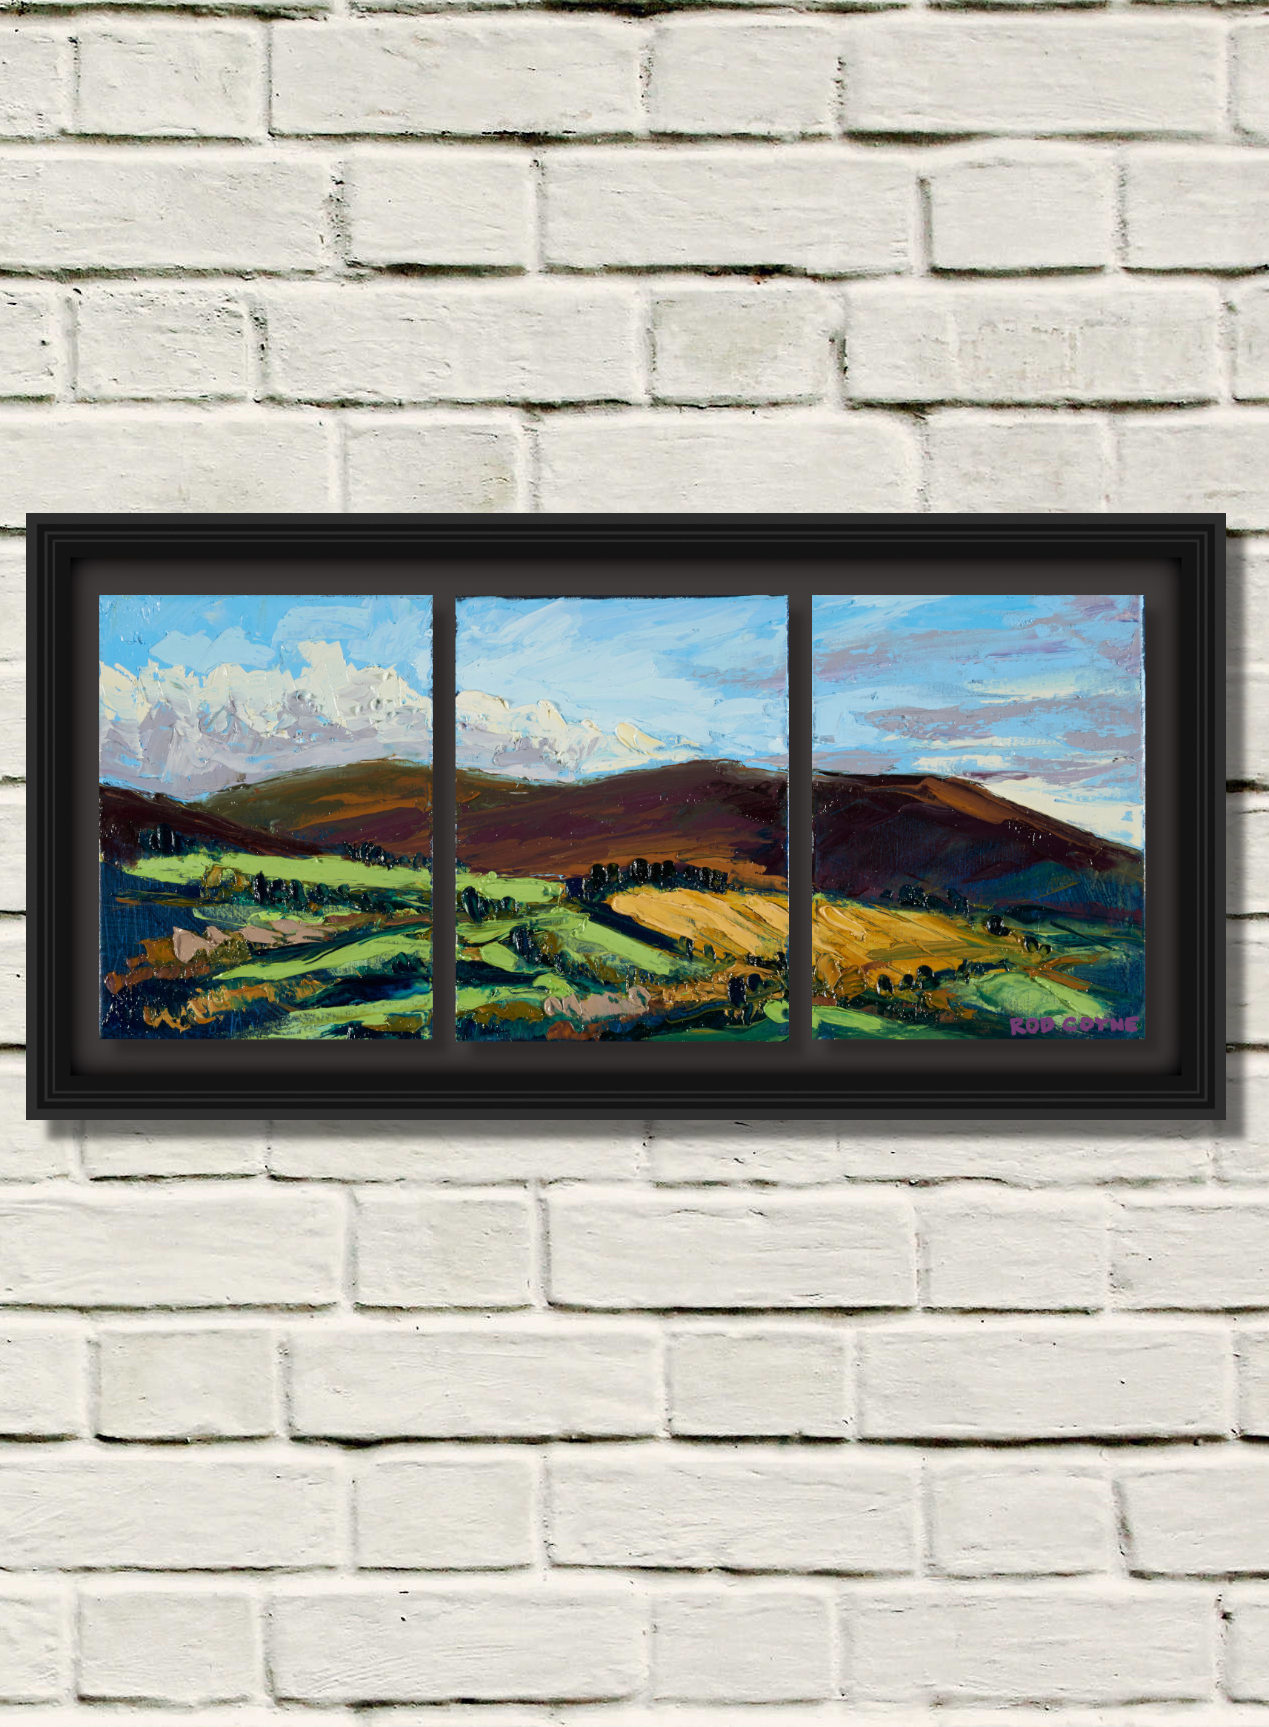 artist rod coyne's triptych painting "Croghan from Aughrim" is shown here in a single black frame on a white brick wall.